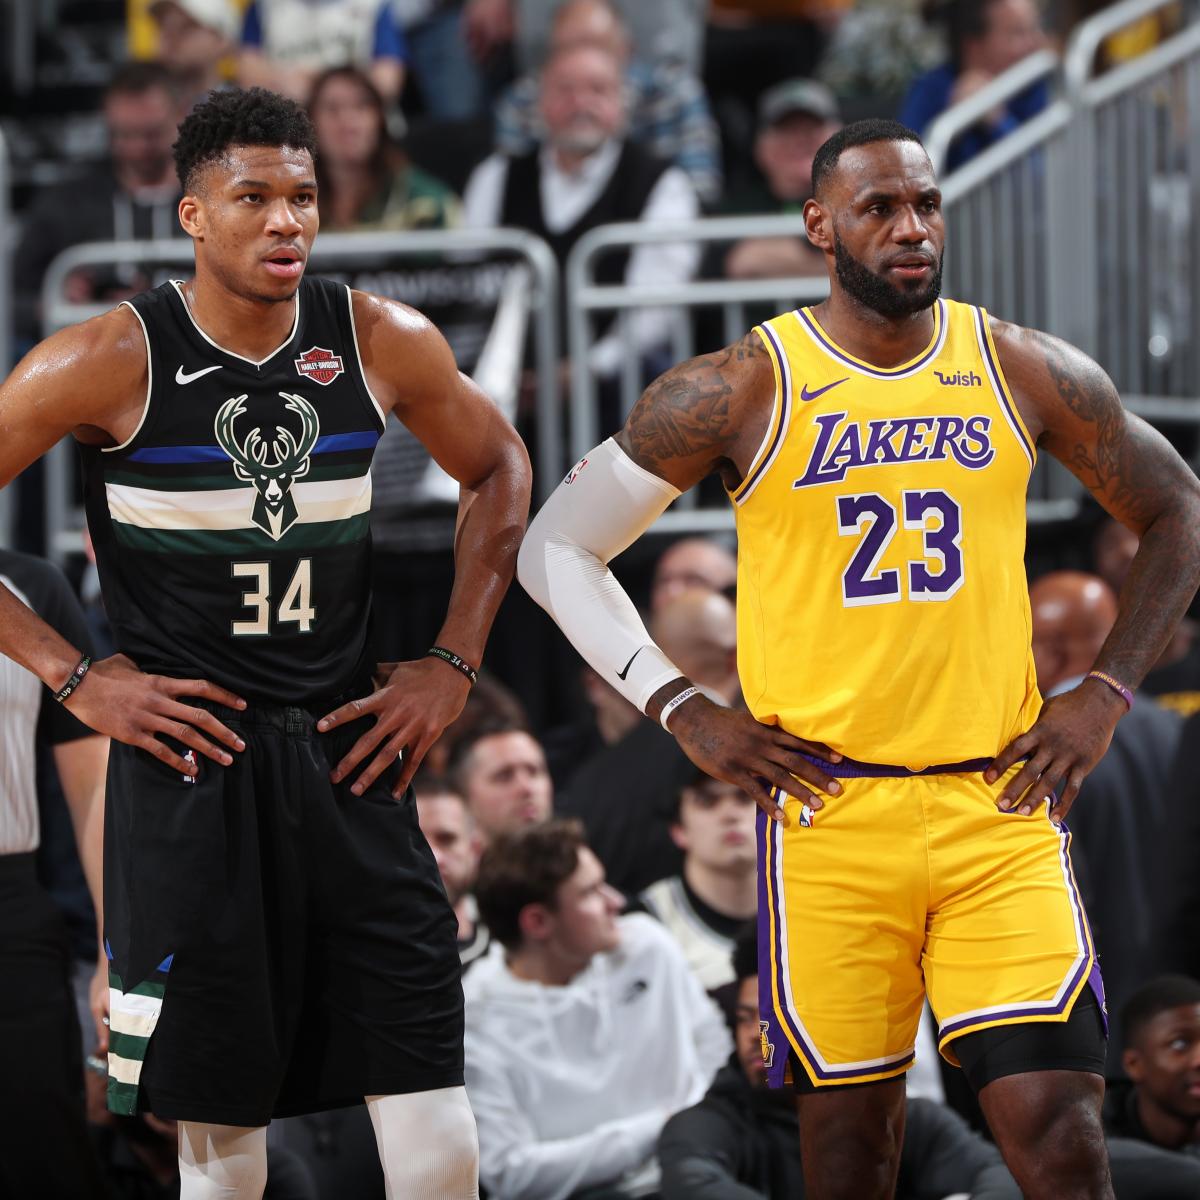 Nba All Star Game 2020 Draft Tv Schedule For Lebron Vs Giannis Roster Reveal Bleacher Report Latest News Videos And Highlights